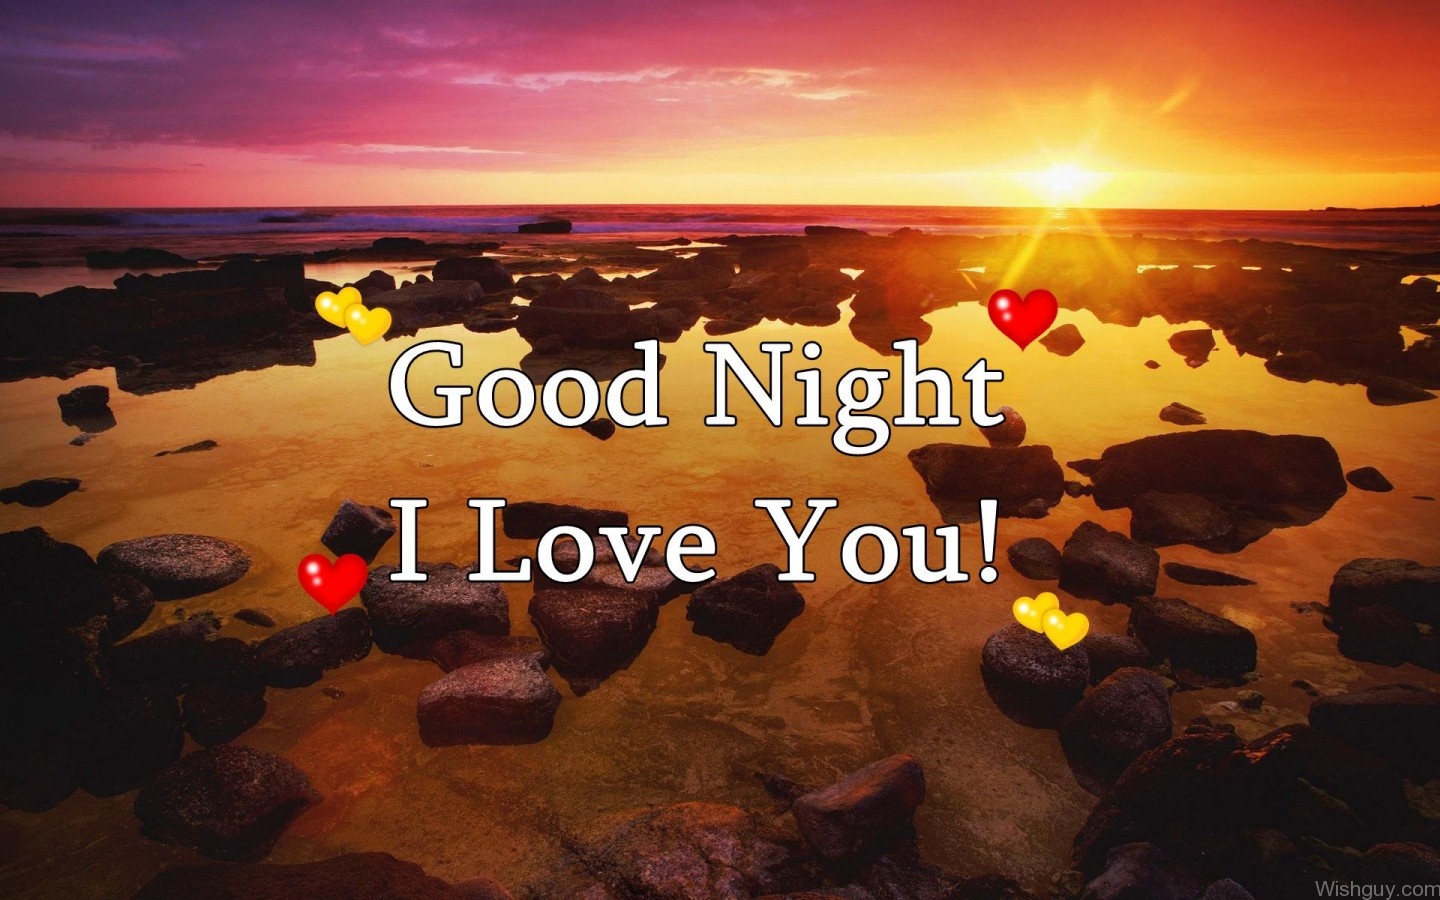 Good Night I Love You - Wishes, Greetings, Pictures – Wish Guy